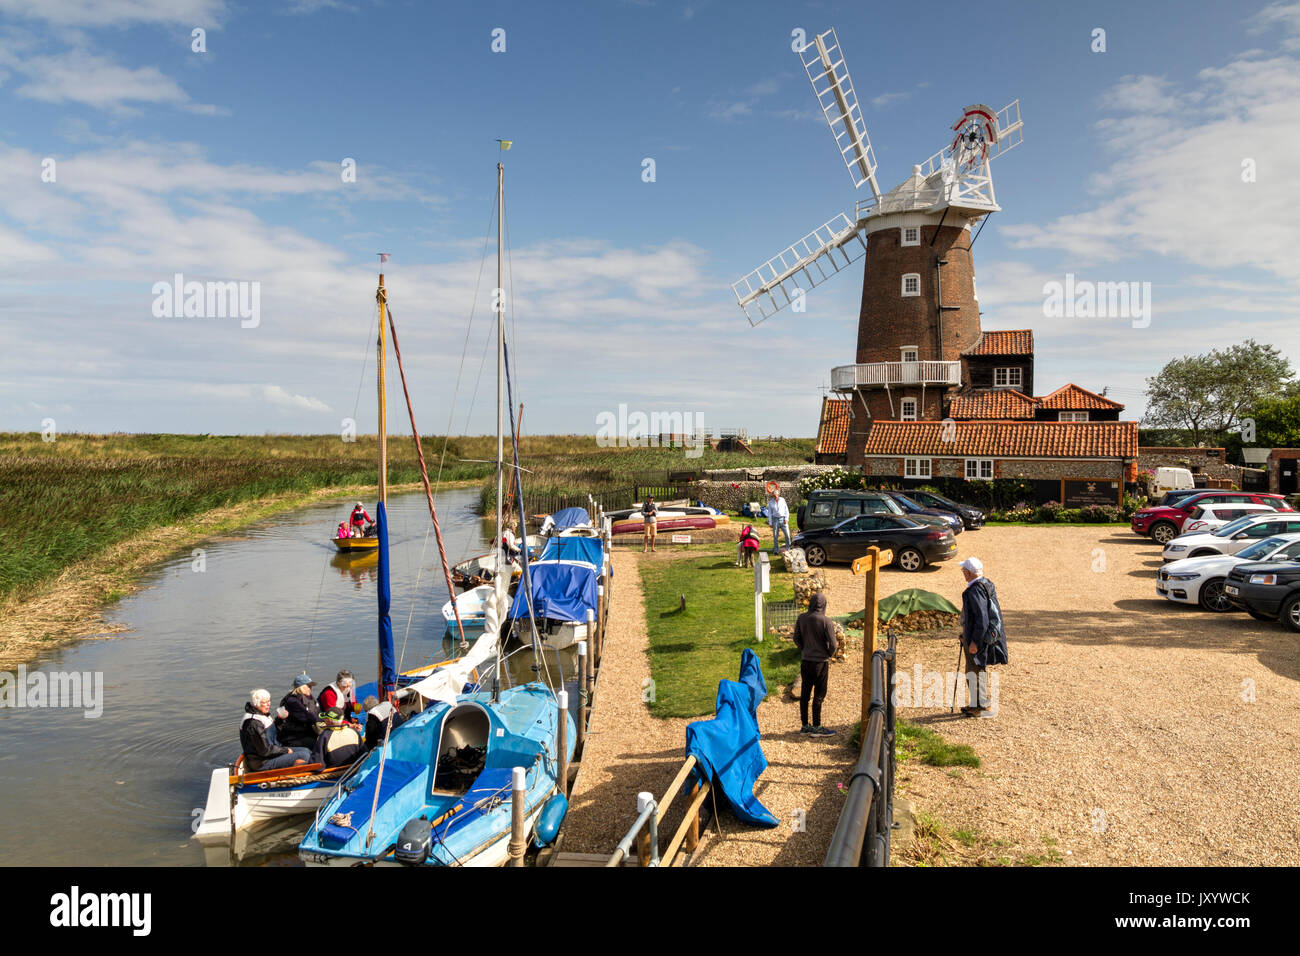 Boats on the River Glaven next to the windmill in Cley Next The Sea Norfolk Stock Photo